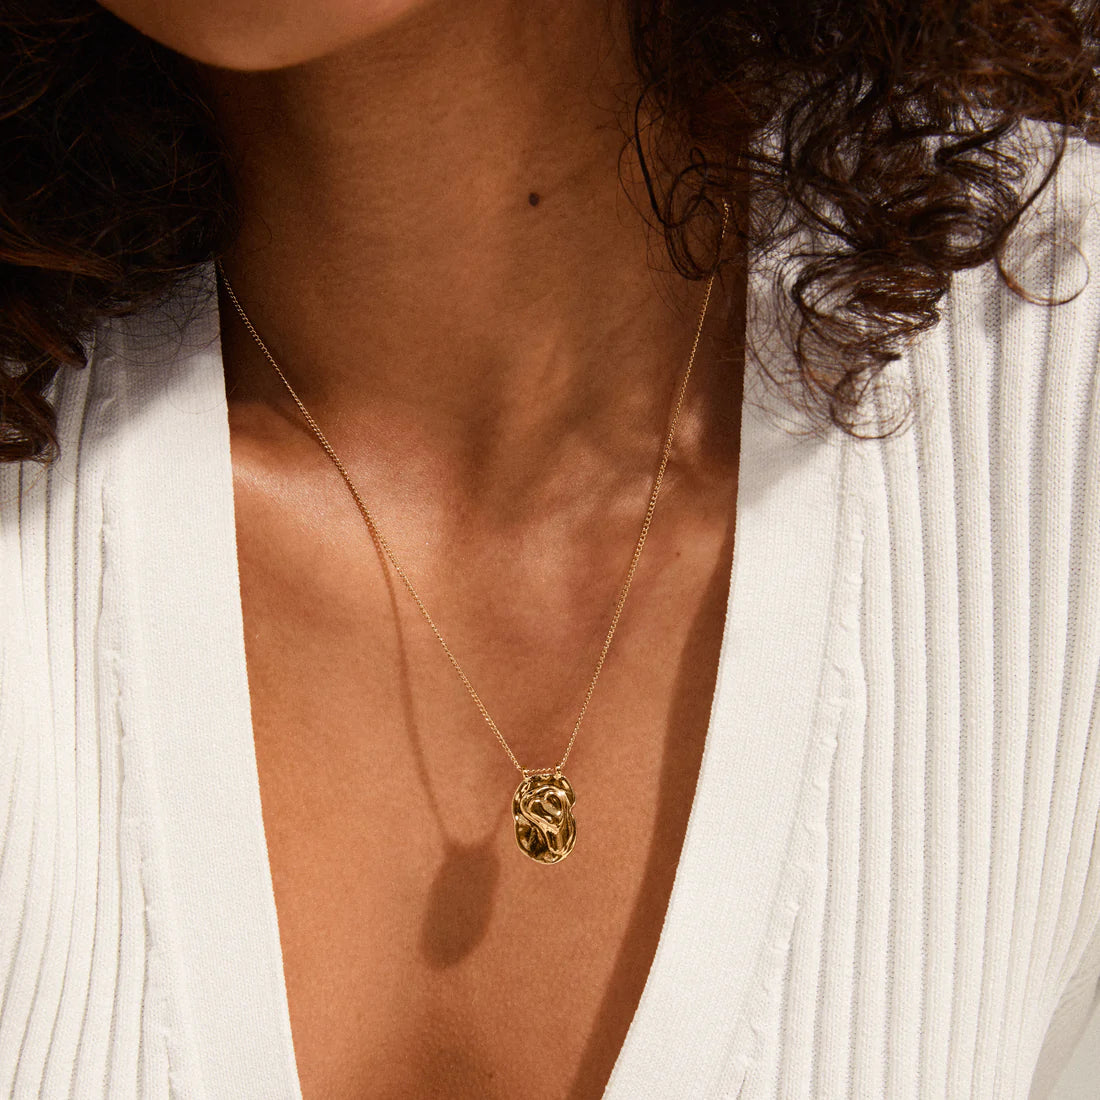 Peace organic shape pendant necklace gold-plated